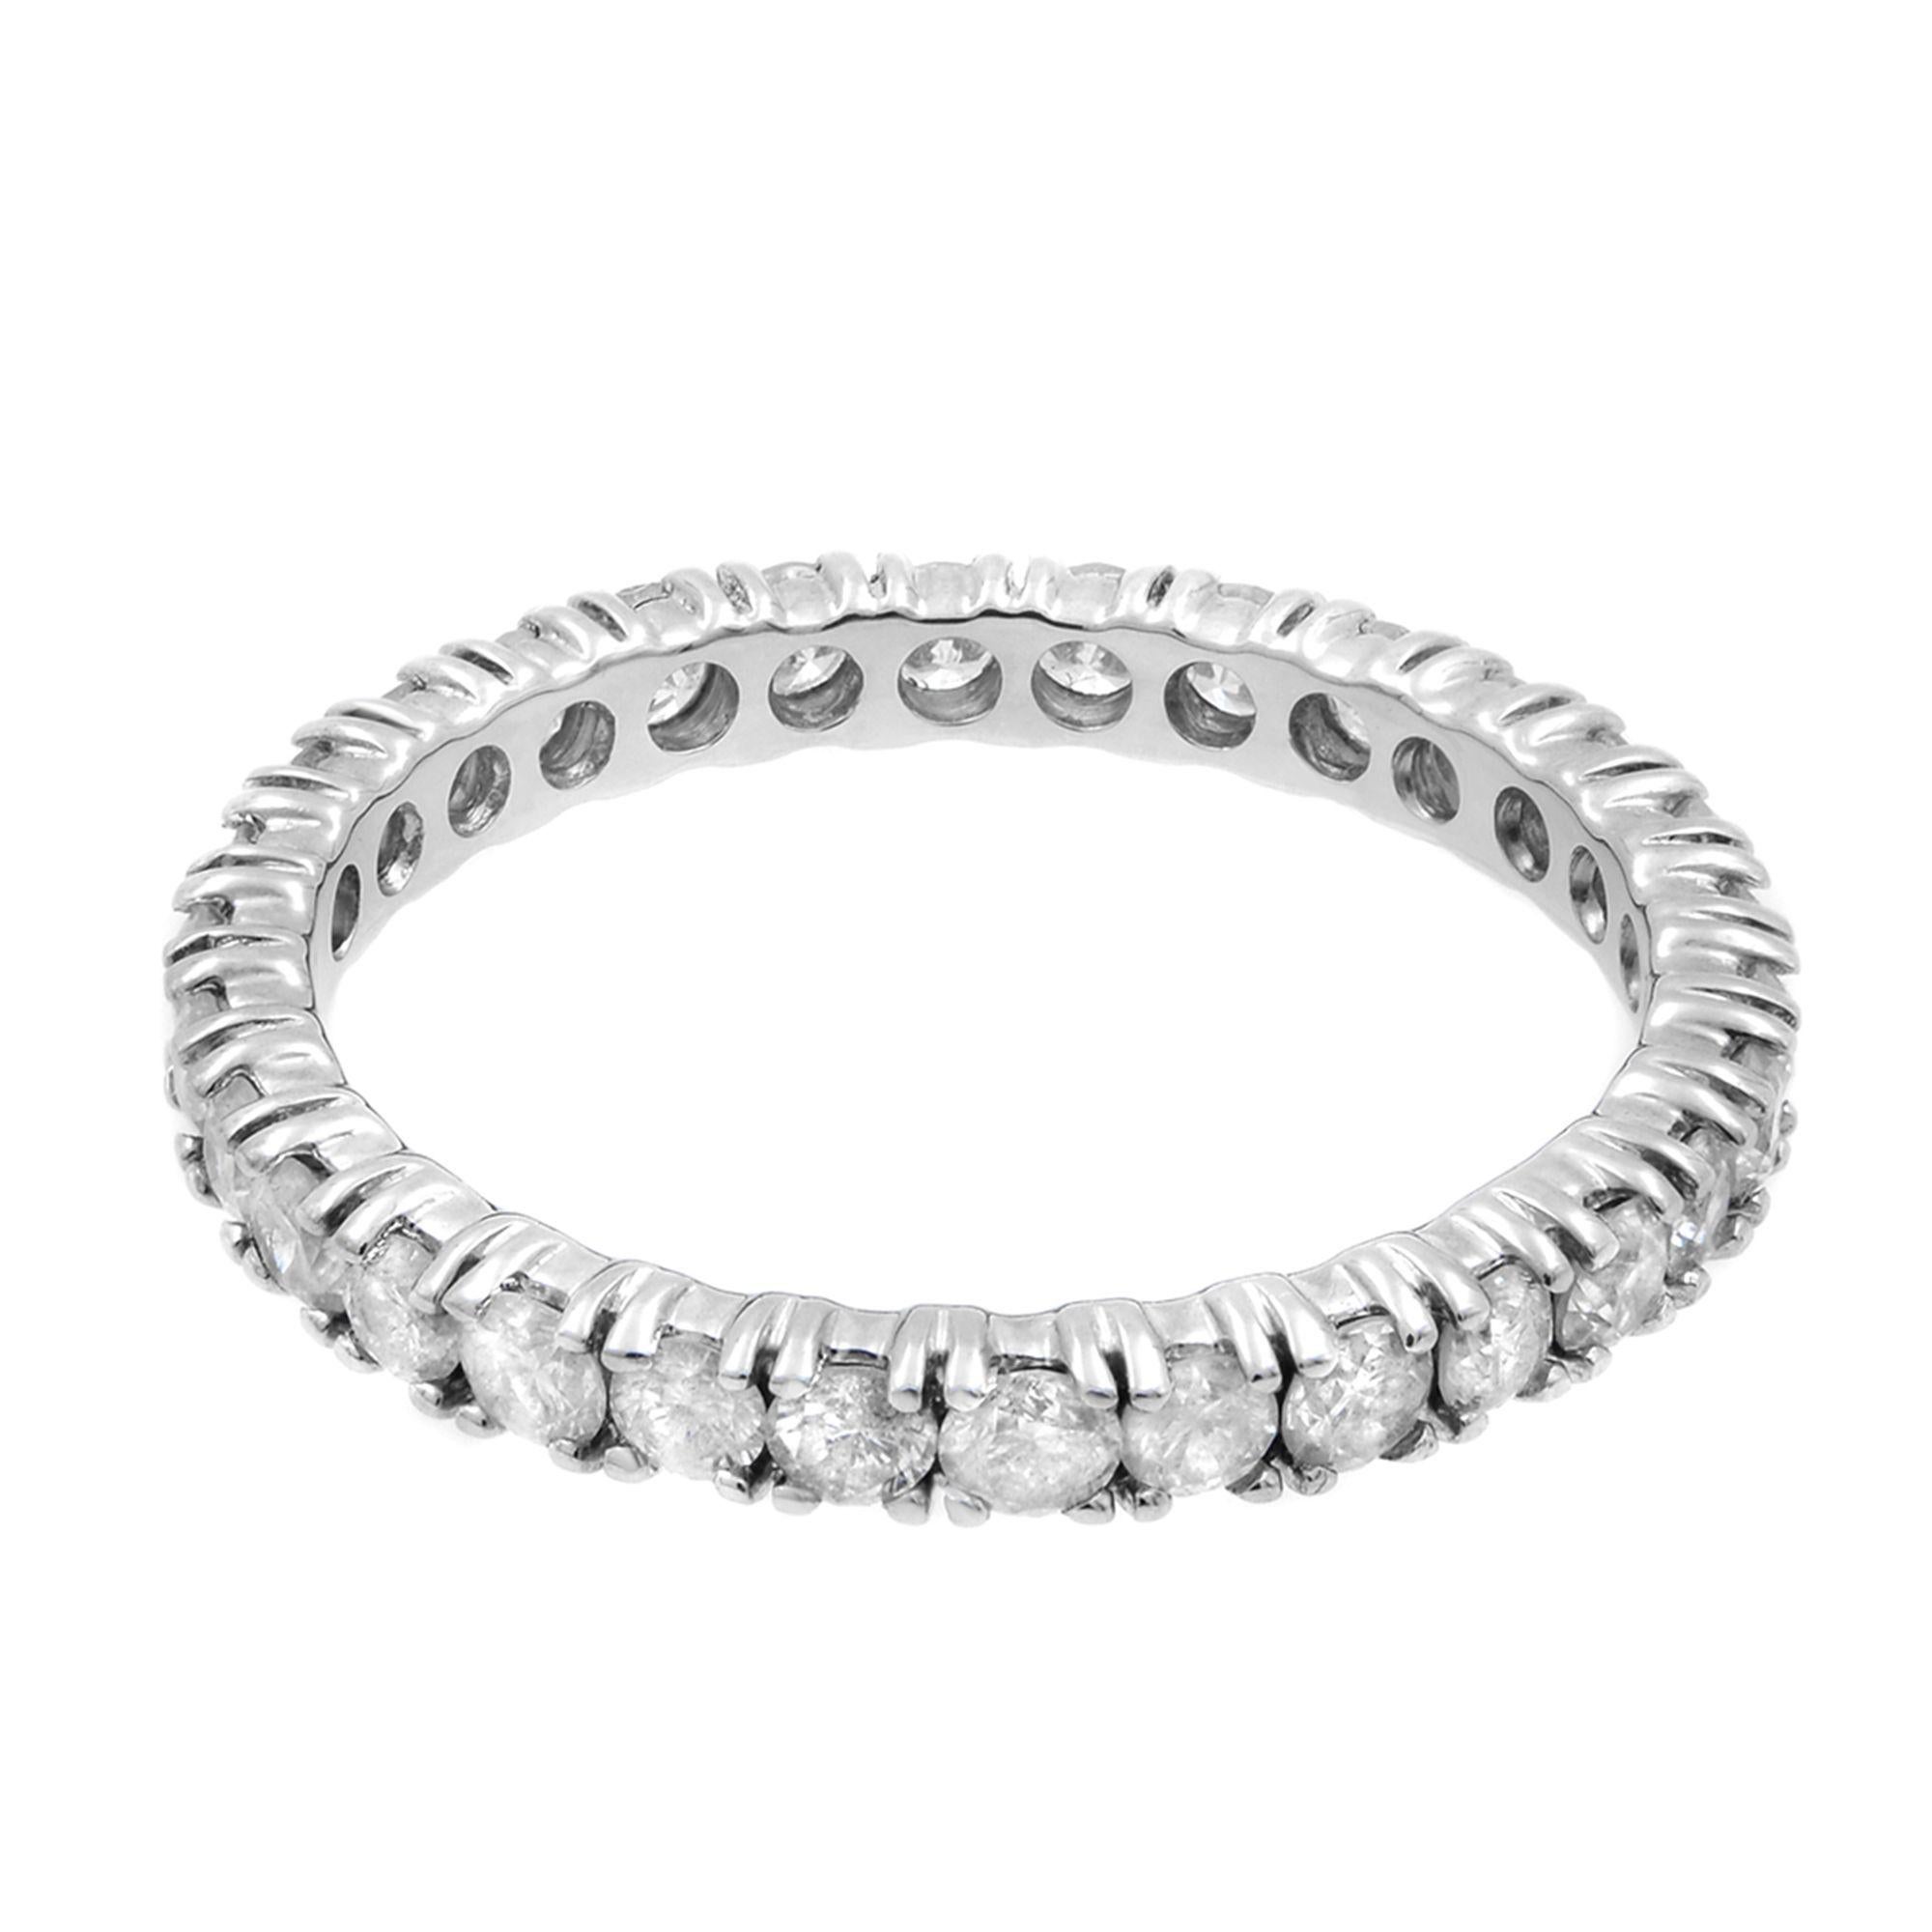 This classic eternity band ring features 32 brilliant-cut round diamonds set in sparkling prong setting circling all the way around. Wear it as an anniversary ring, as a wedding band, as a right hand fashion ring, or mix and match with other